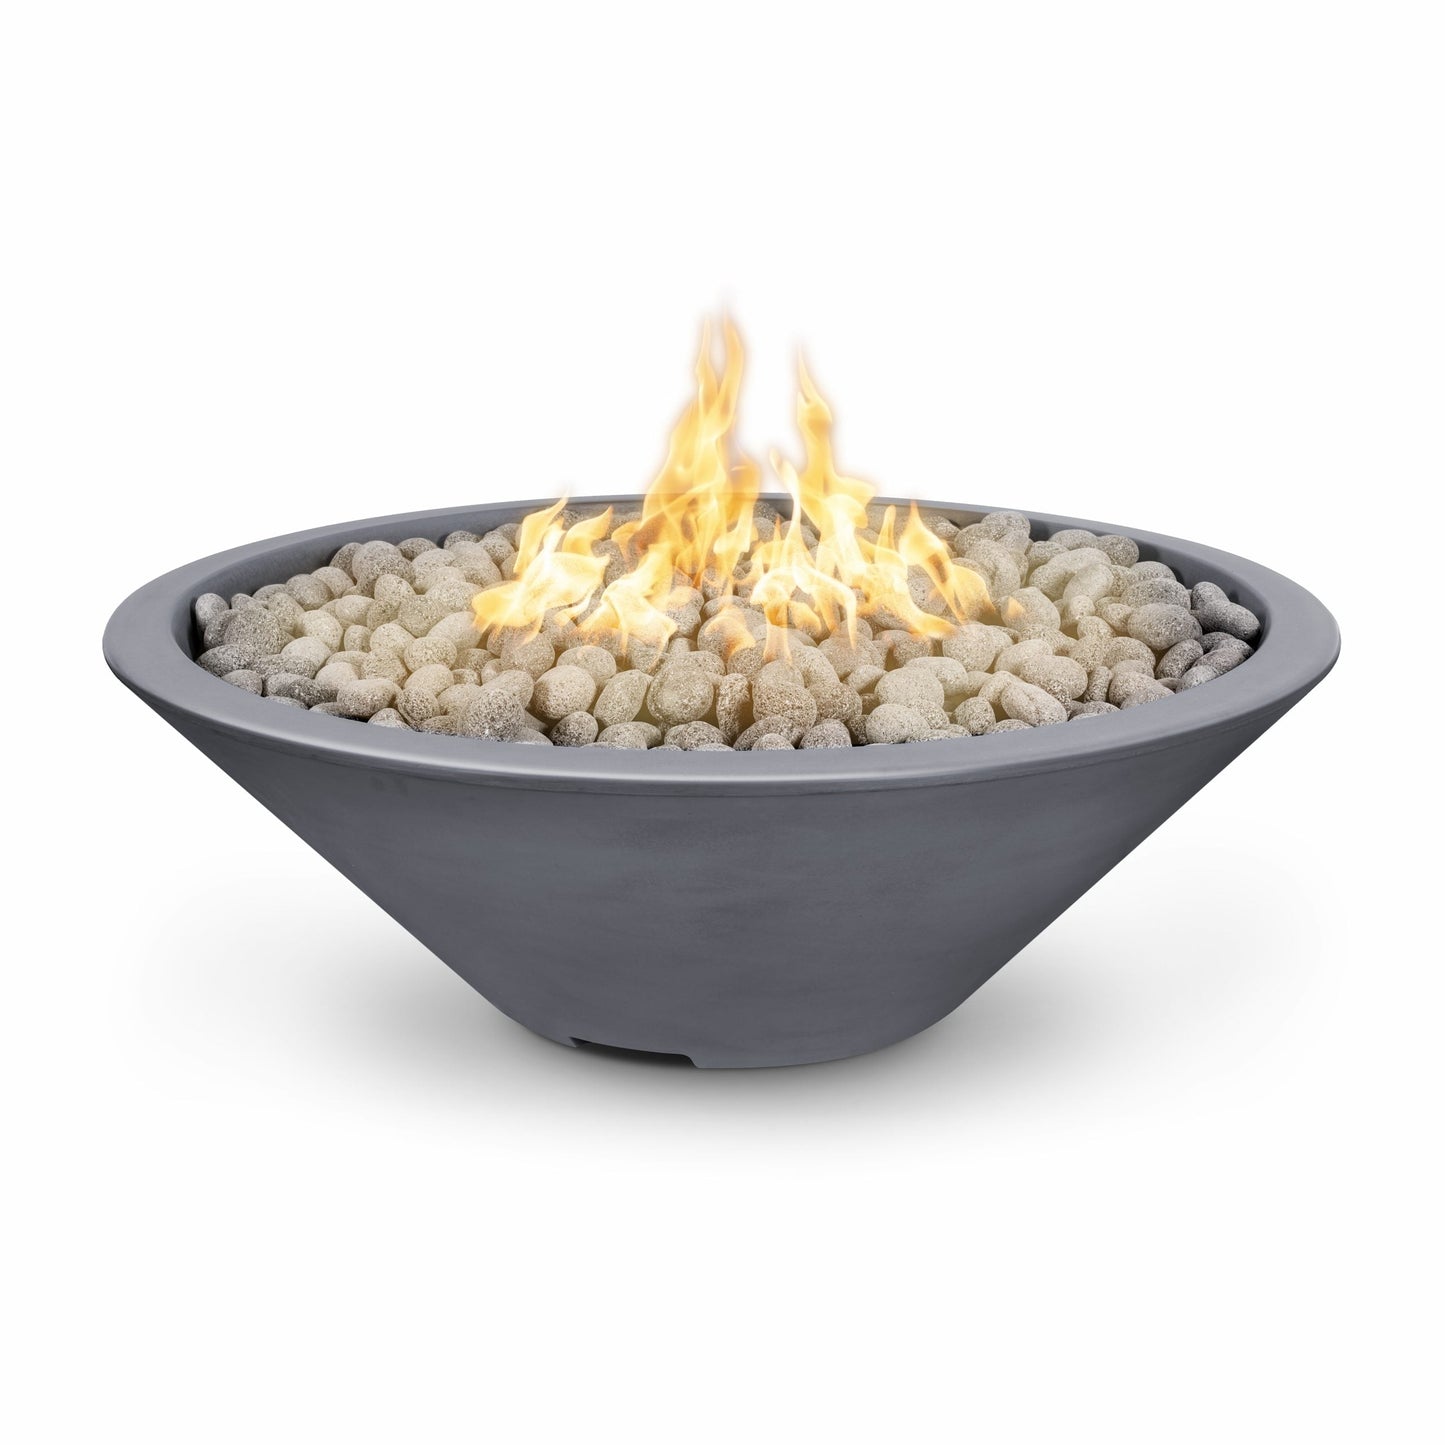 The Outdoor Plus Round Cazo 48" Copper Vein Powder Coated Metal Liquid Propane Fire Pit with Match Lit Ignition